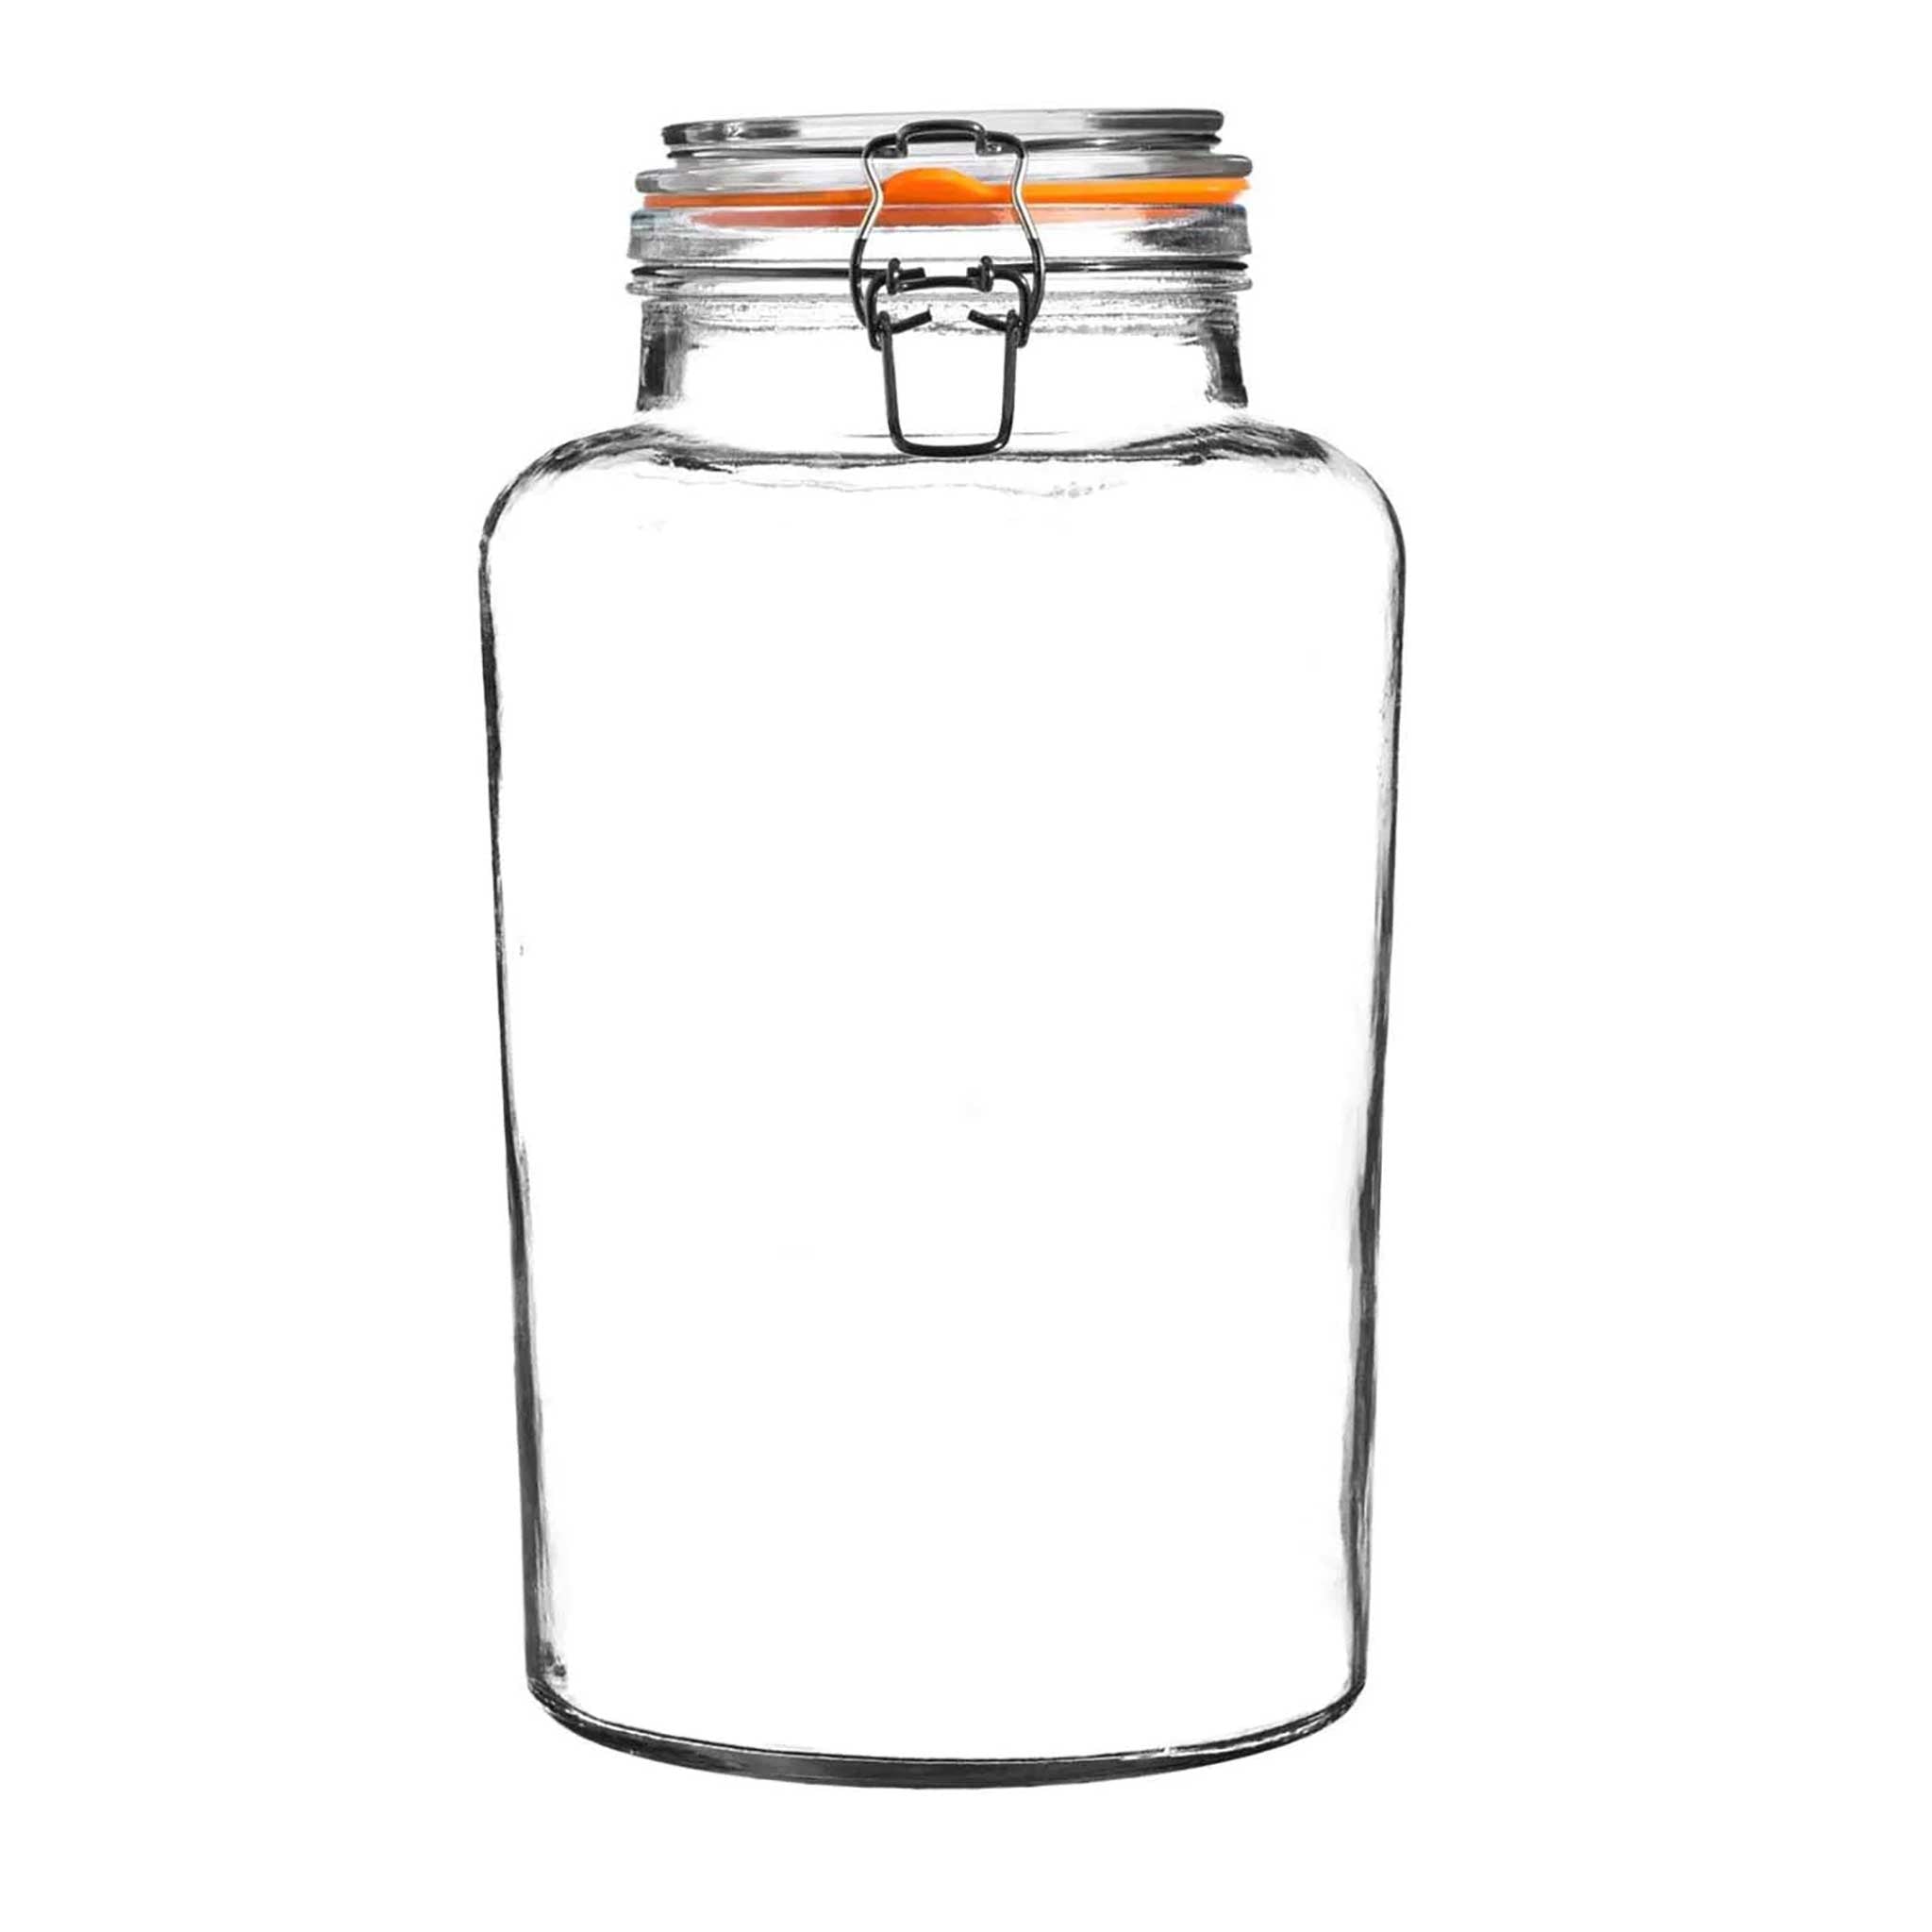 Large clear glass jar with orange rubber seal and metal clip fastening from China Blue